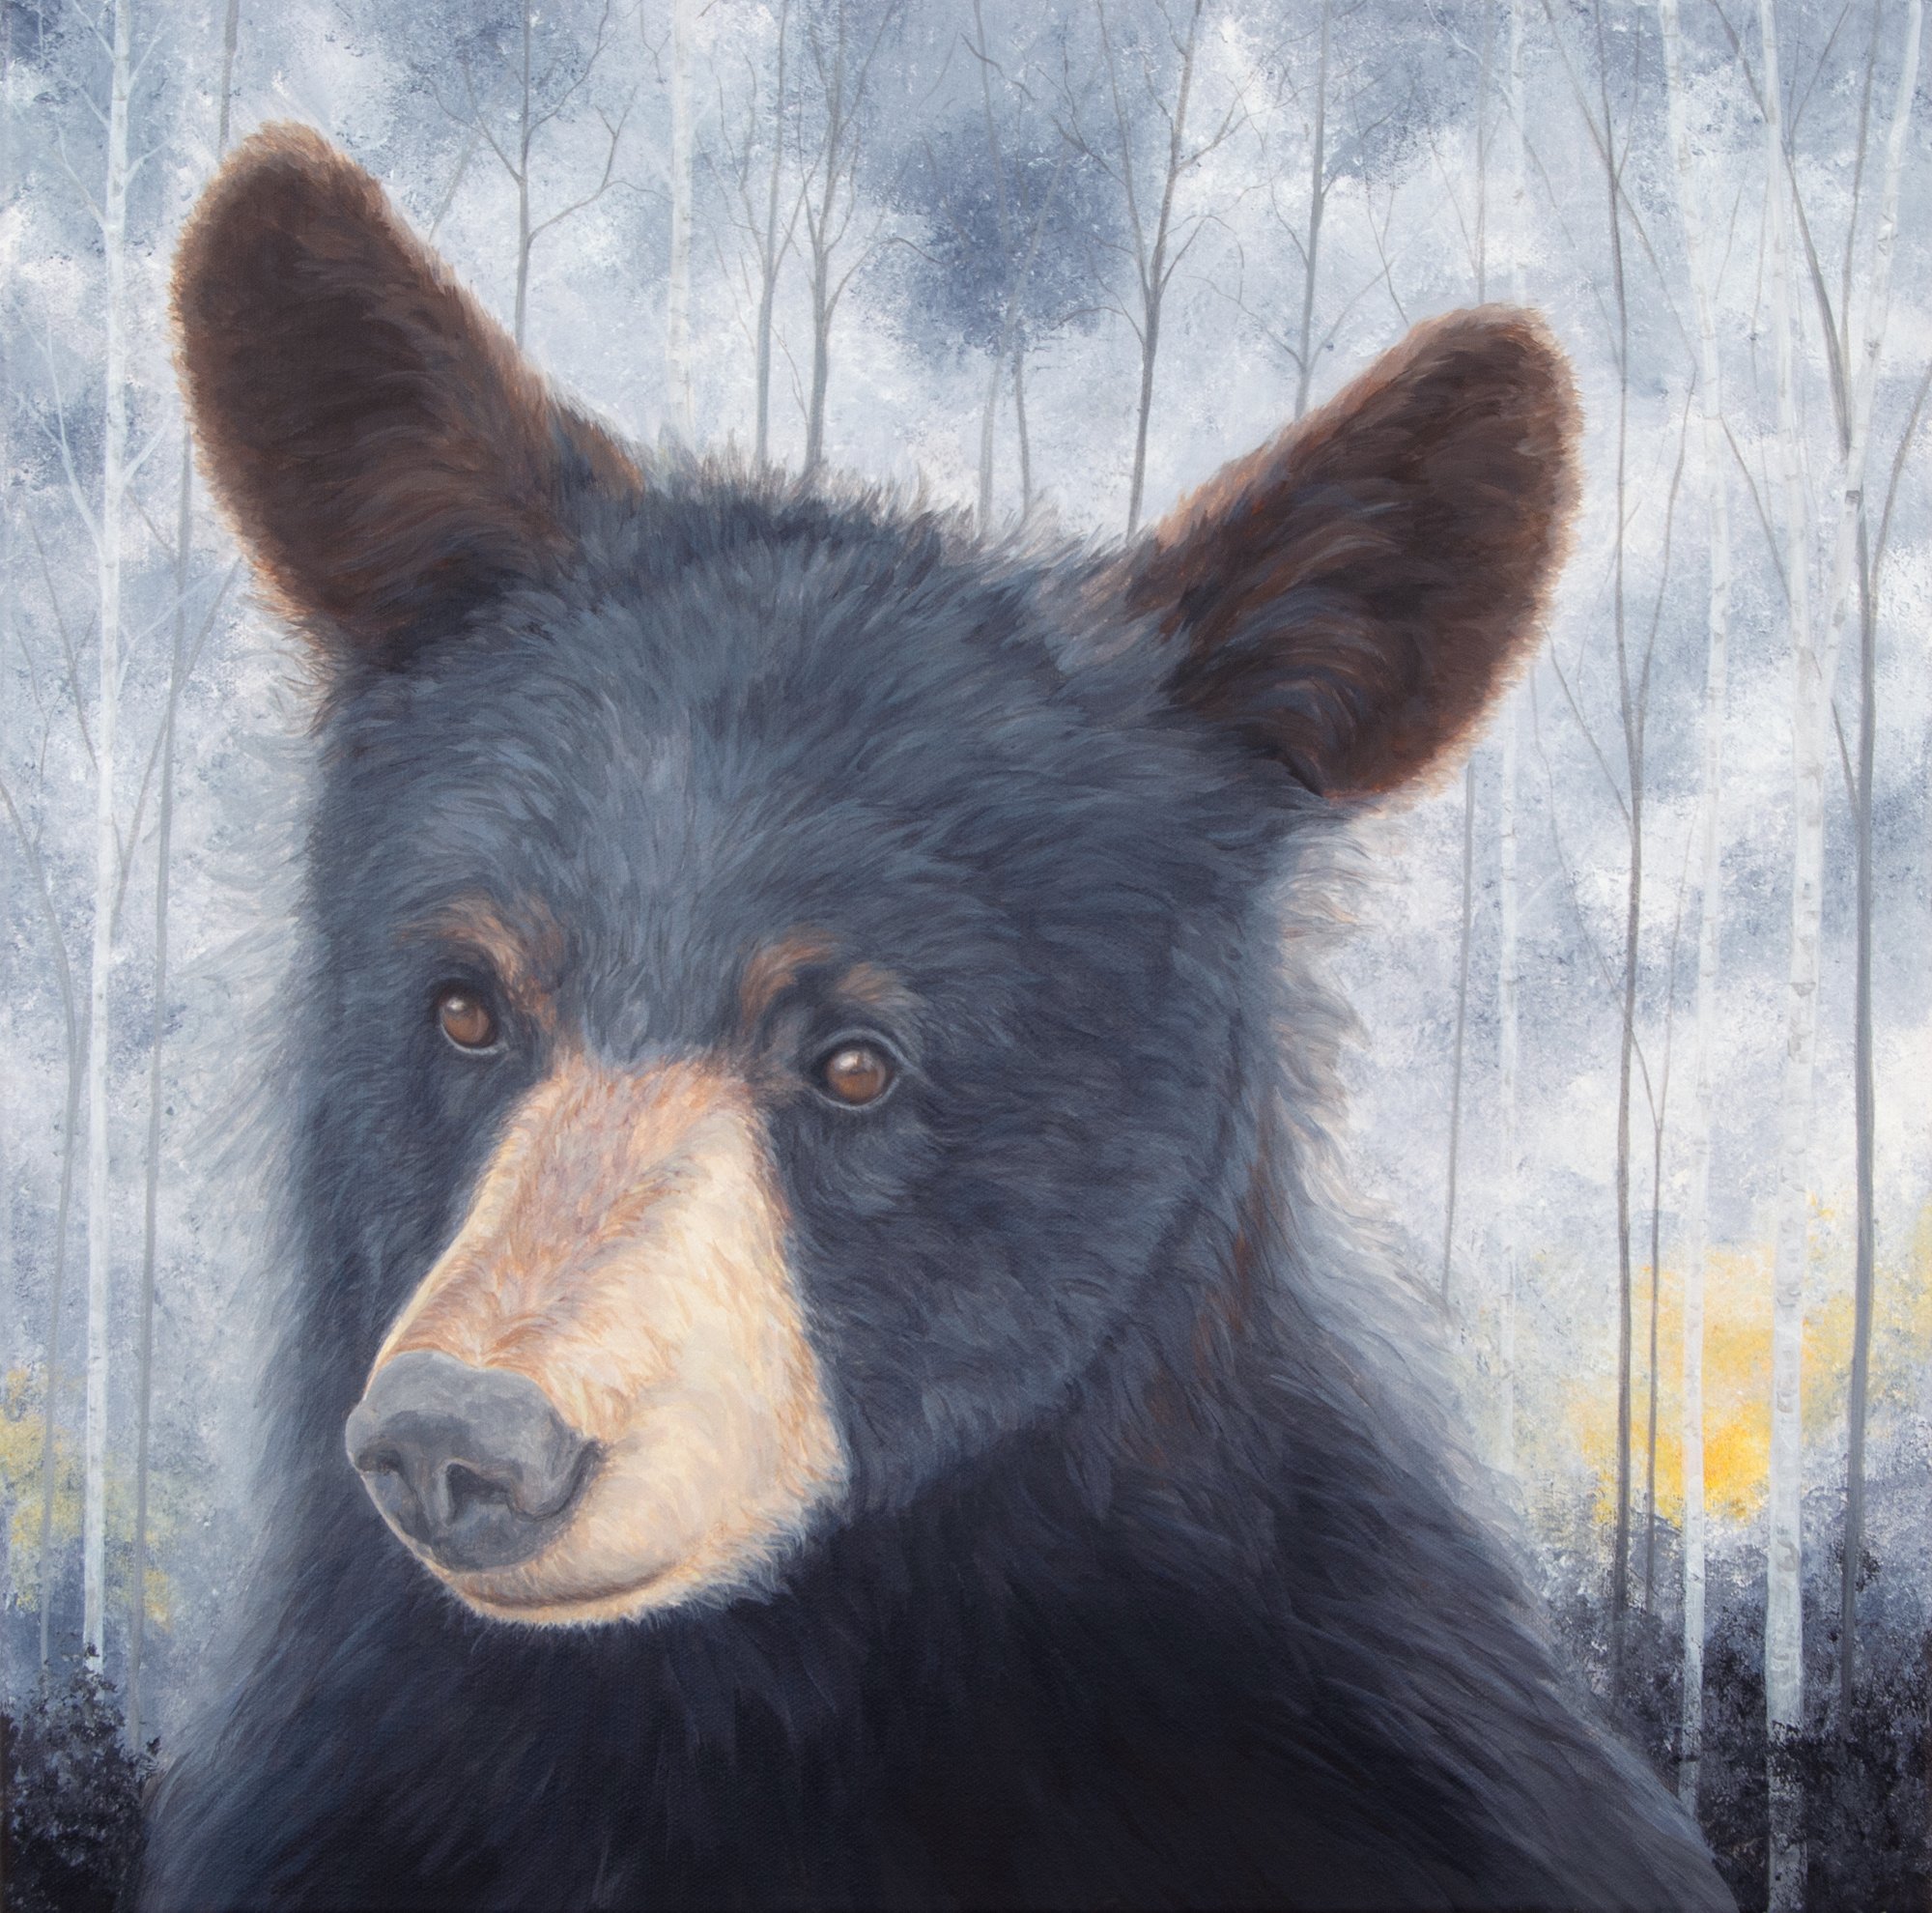 into the woods: bear in mind - sold